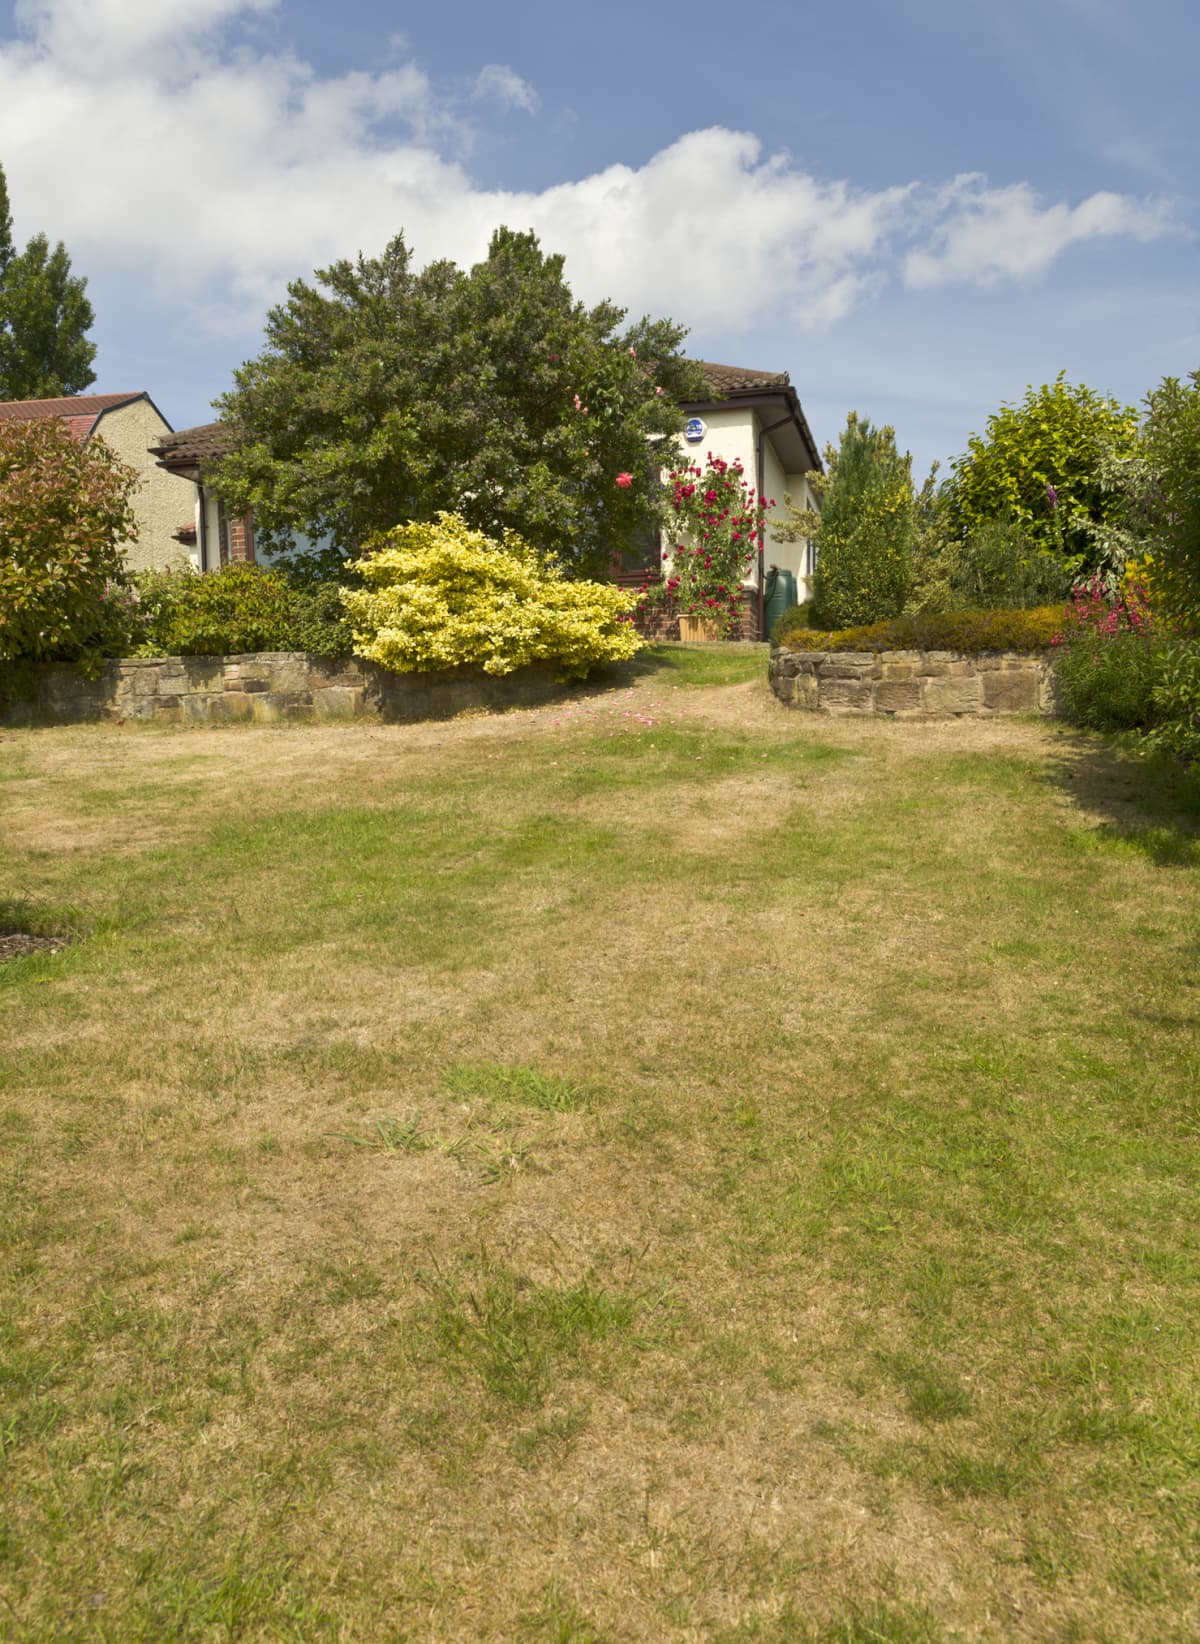 A lawn with brown and yellow patches